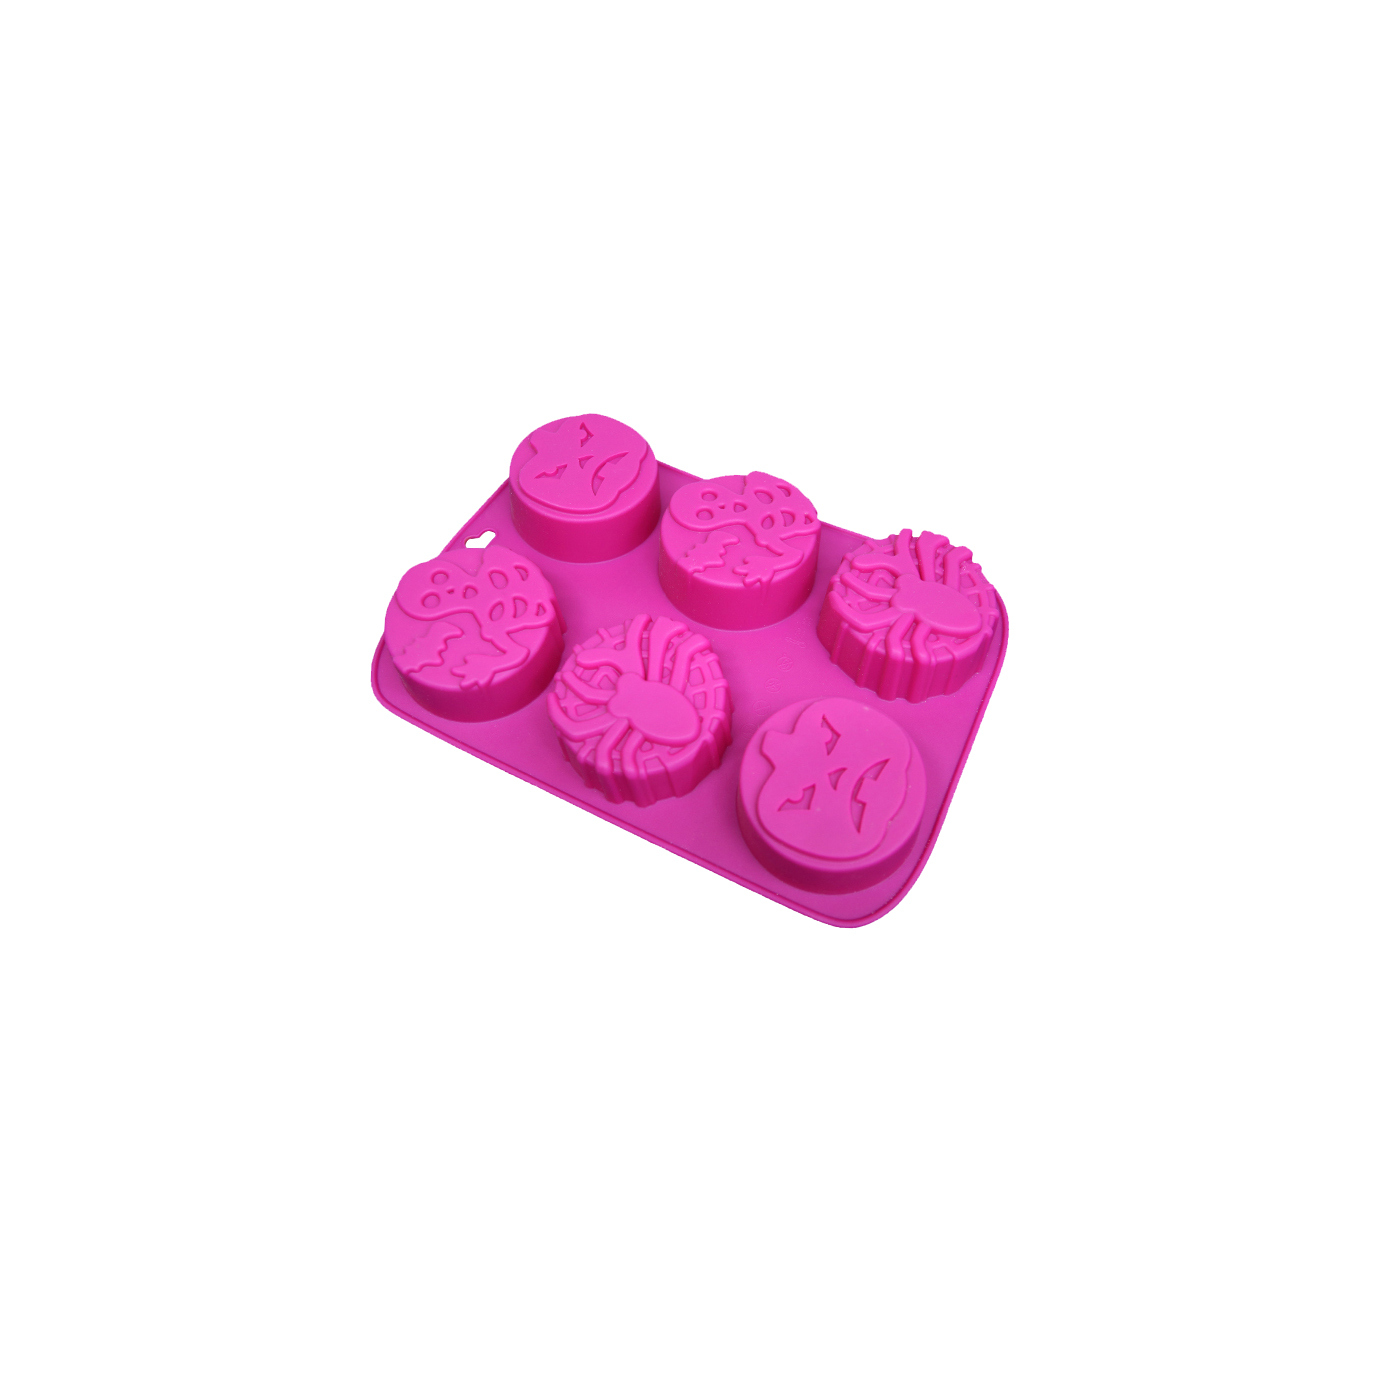 BM085 Halloween Cake Mould | Silicone Cake Mould